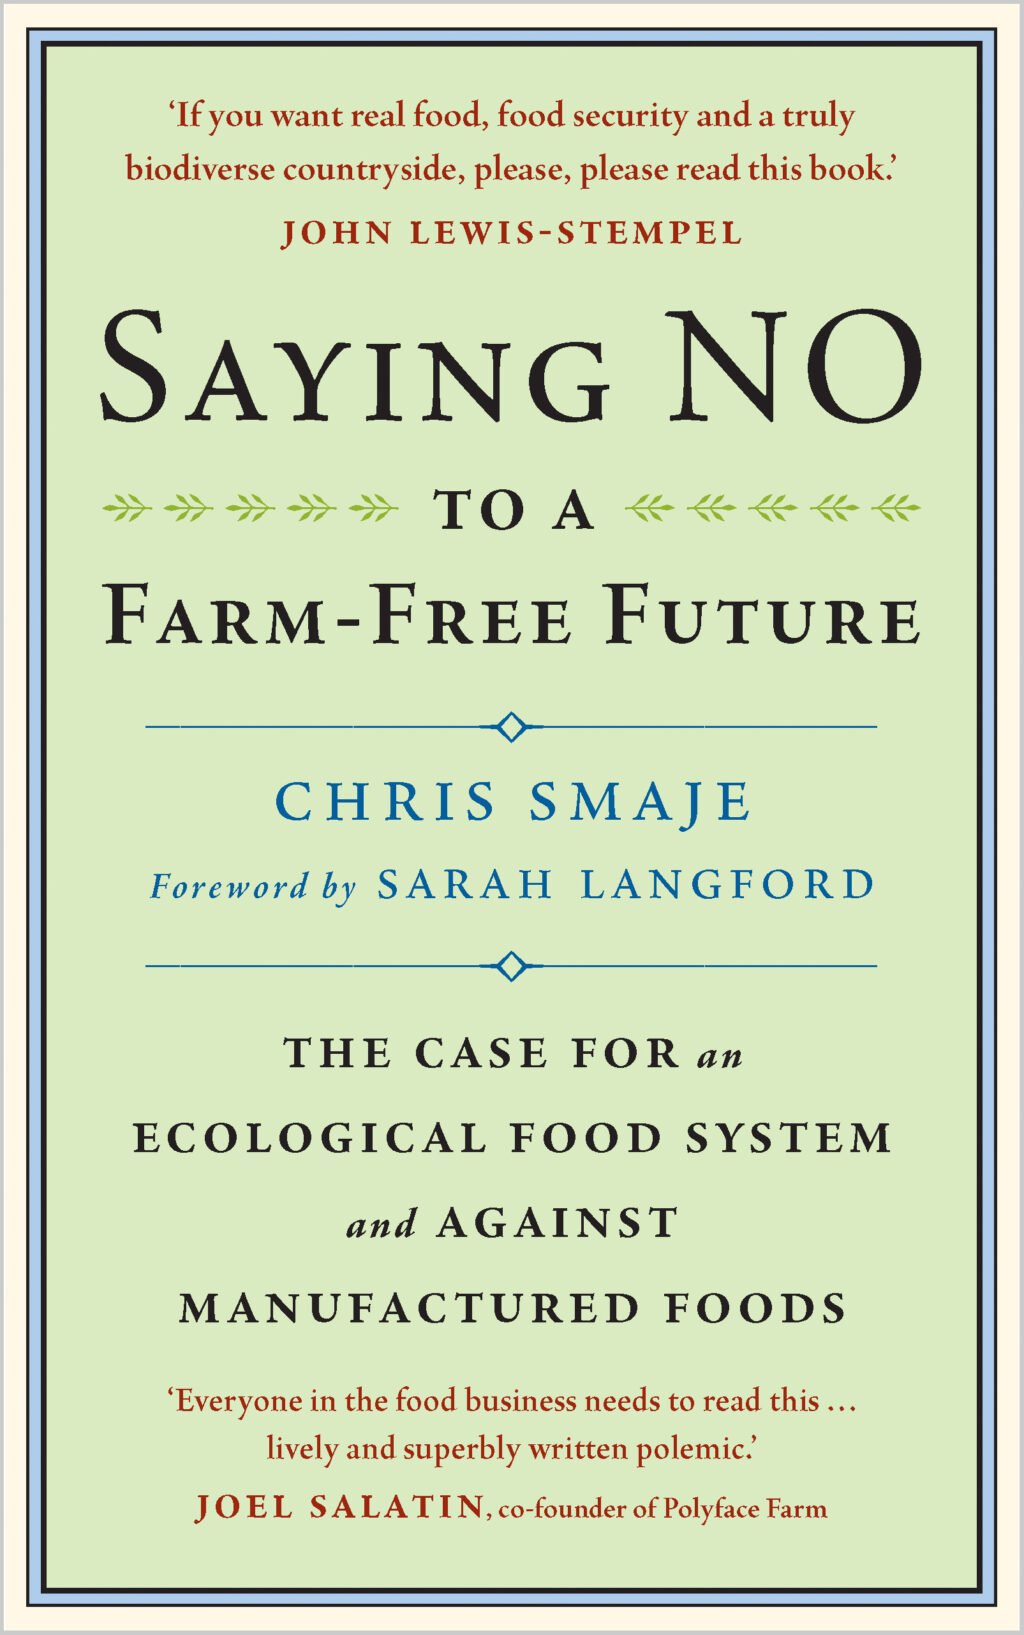 The Saying NO to a Farm-Free Future cover